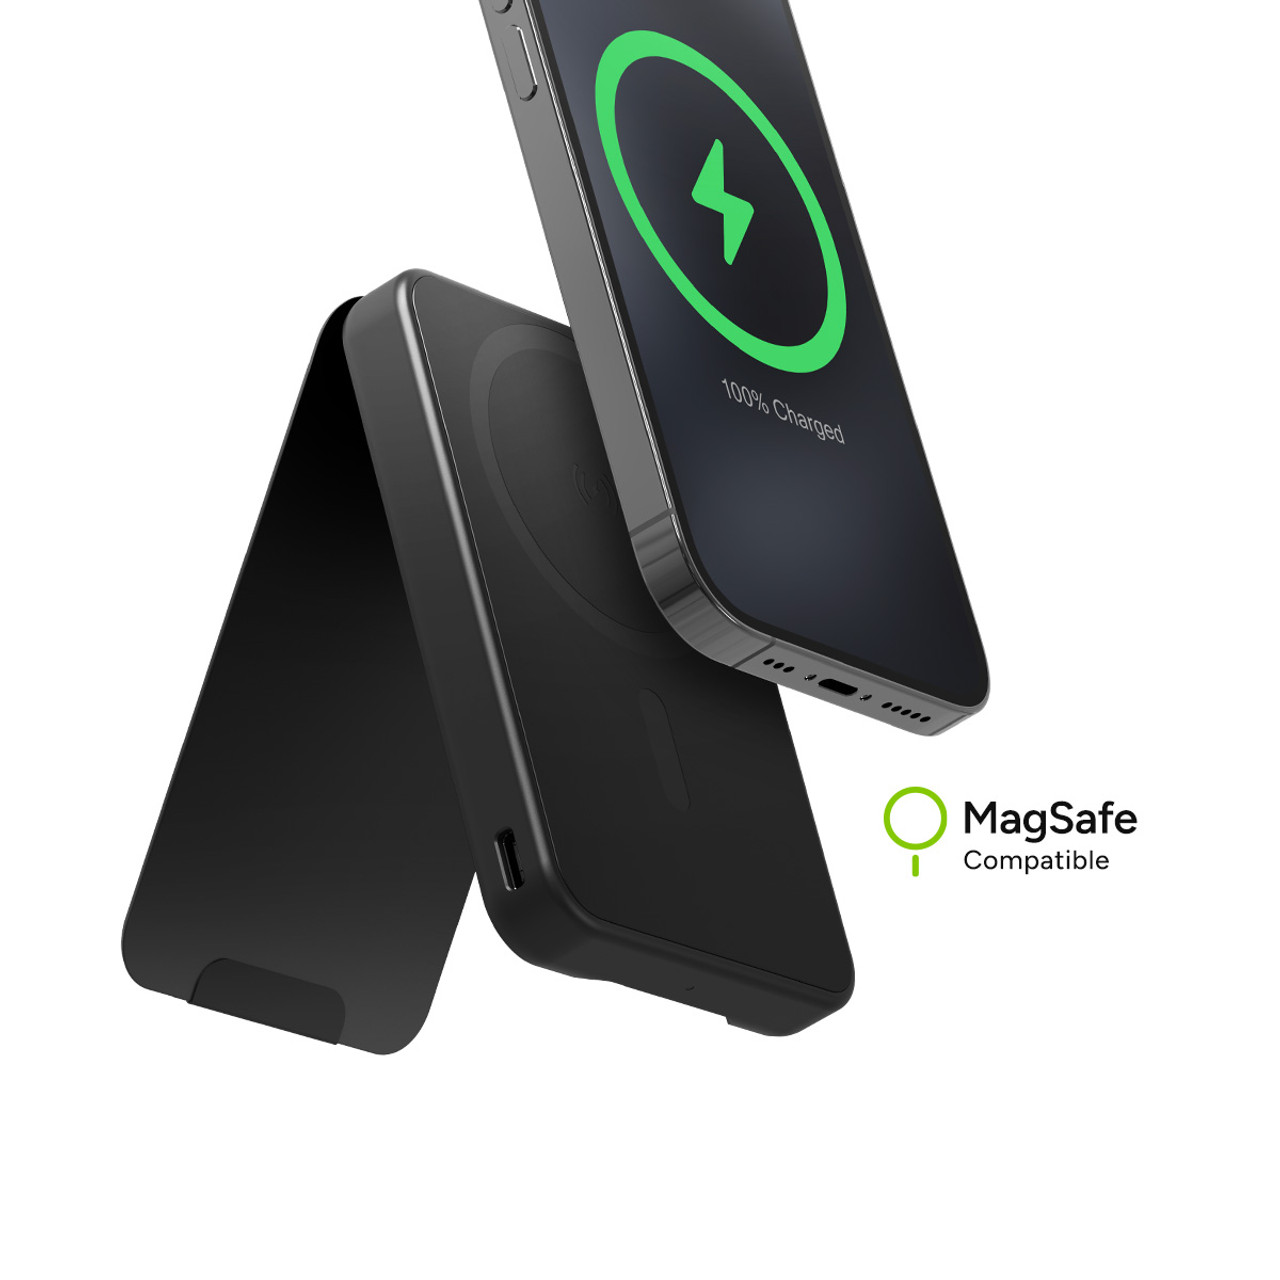 Magnetic Dock-Style Smartphone Batteries : MagSafe power bank